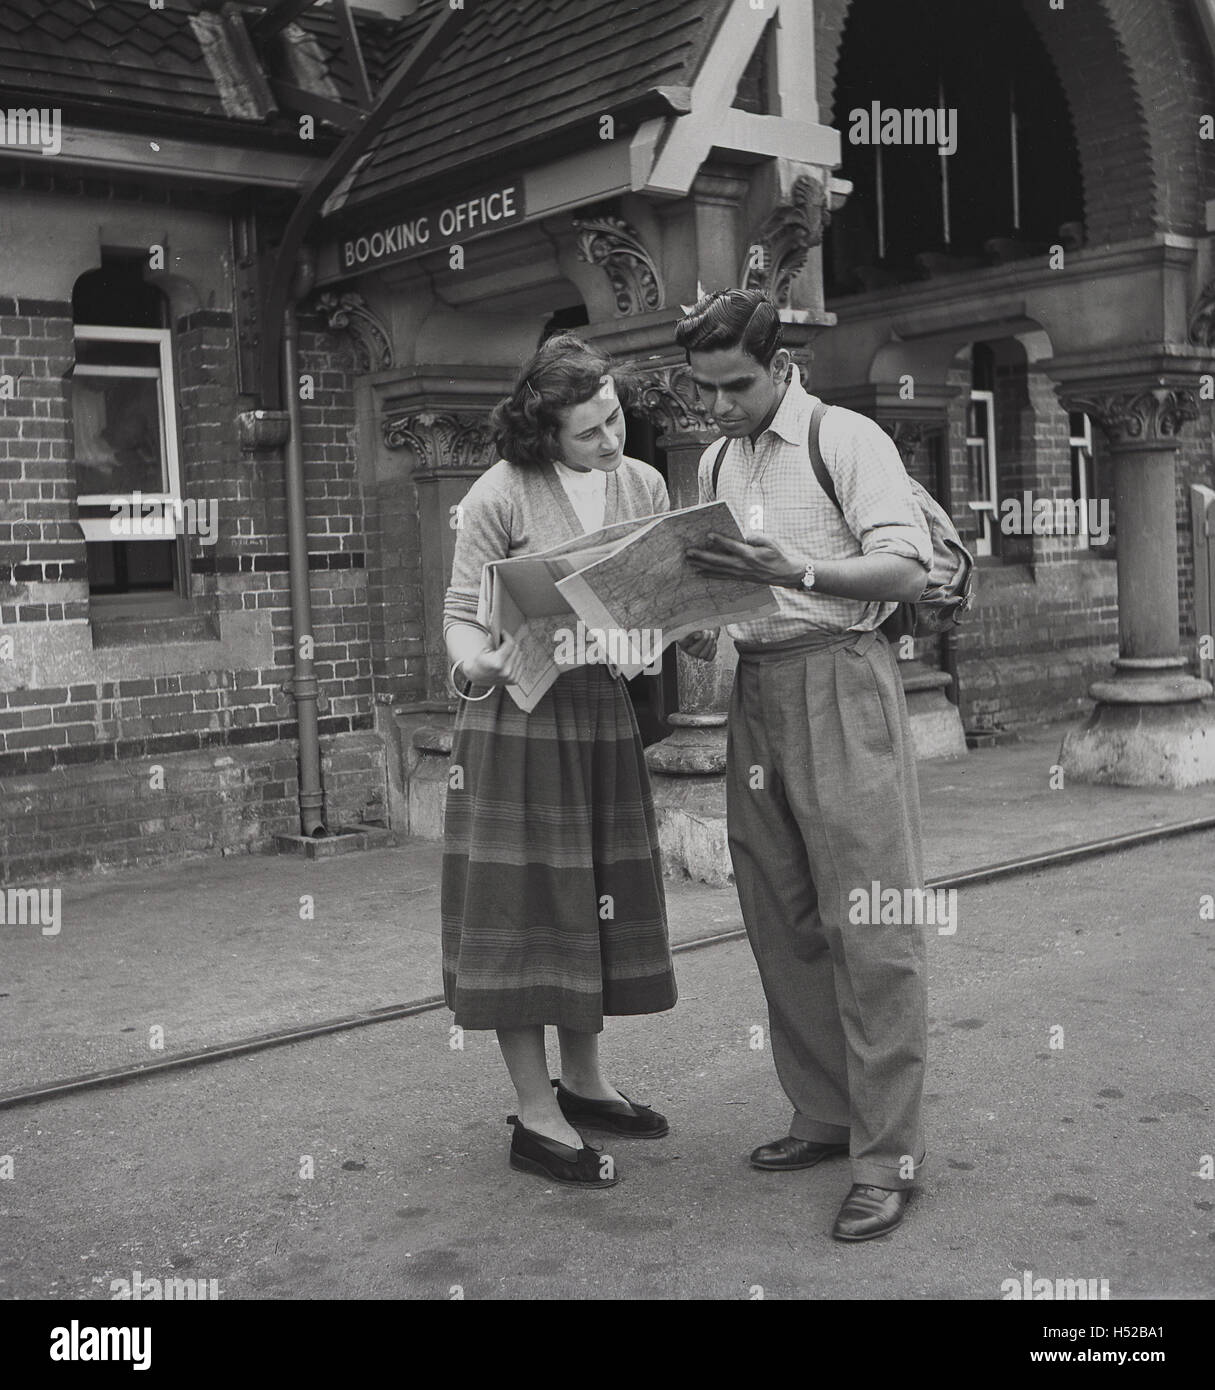 1950s, historical, a young adult couple dressed in normal everyday clothing, study a map outside a train station, before embarking on a day's walking or rambling, England. Stock Photo